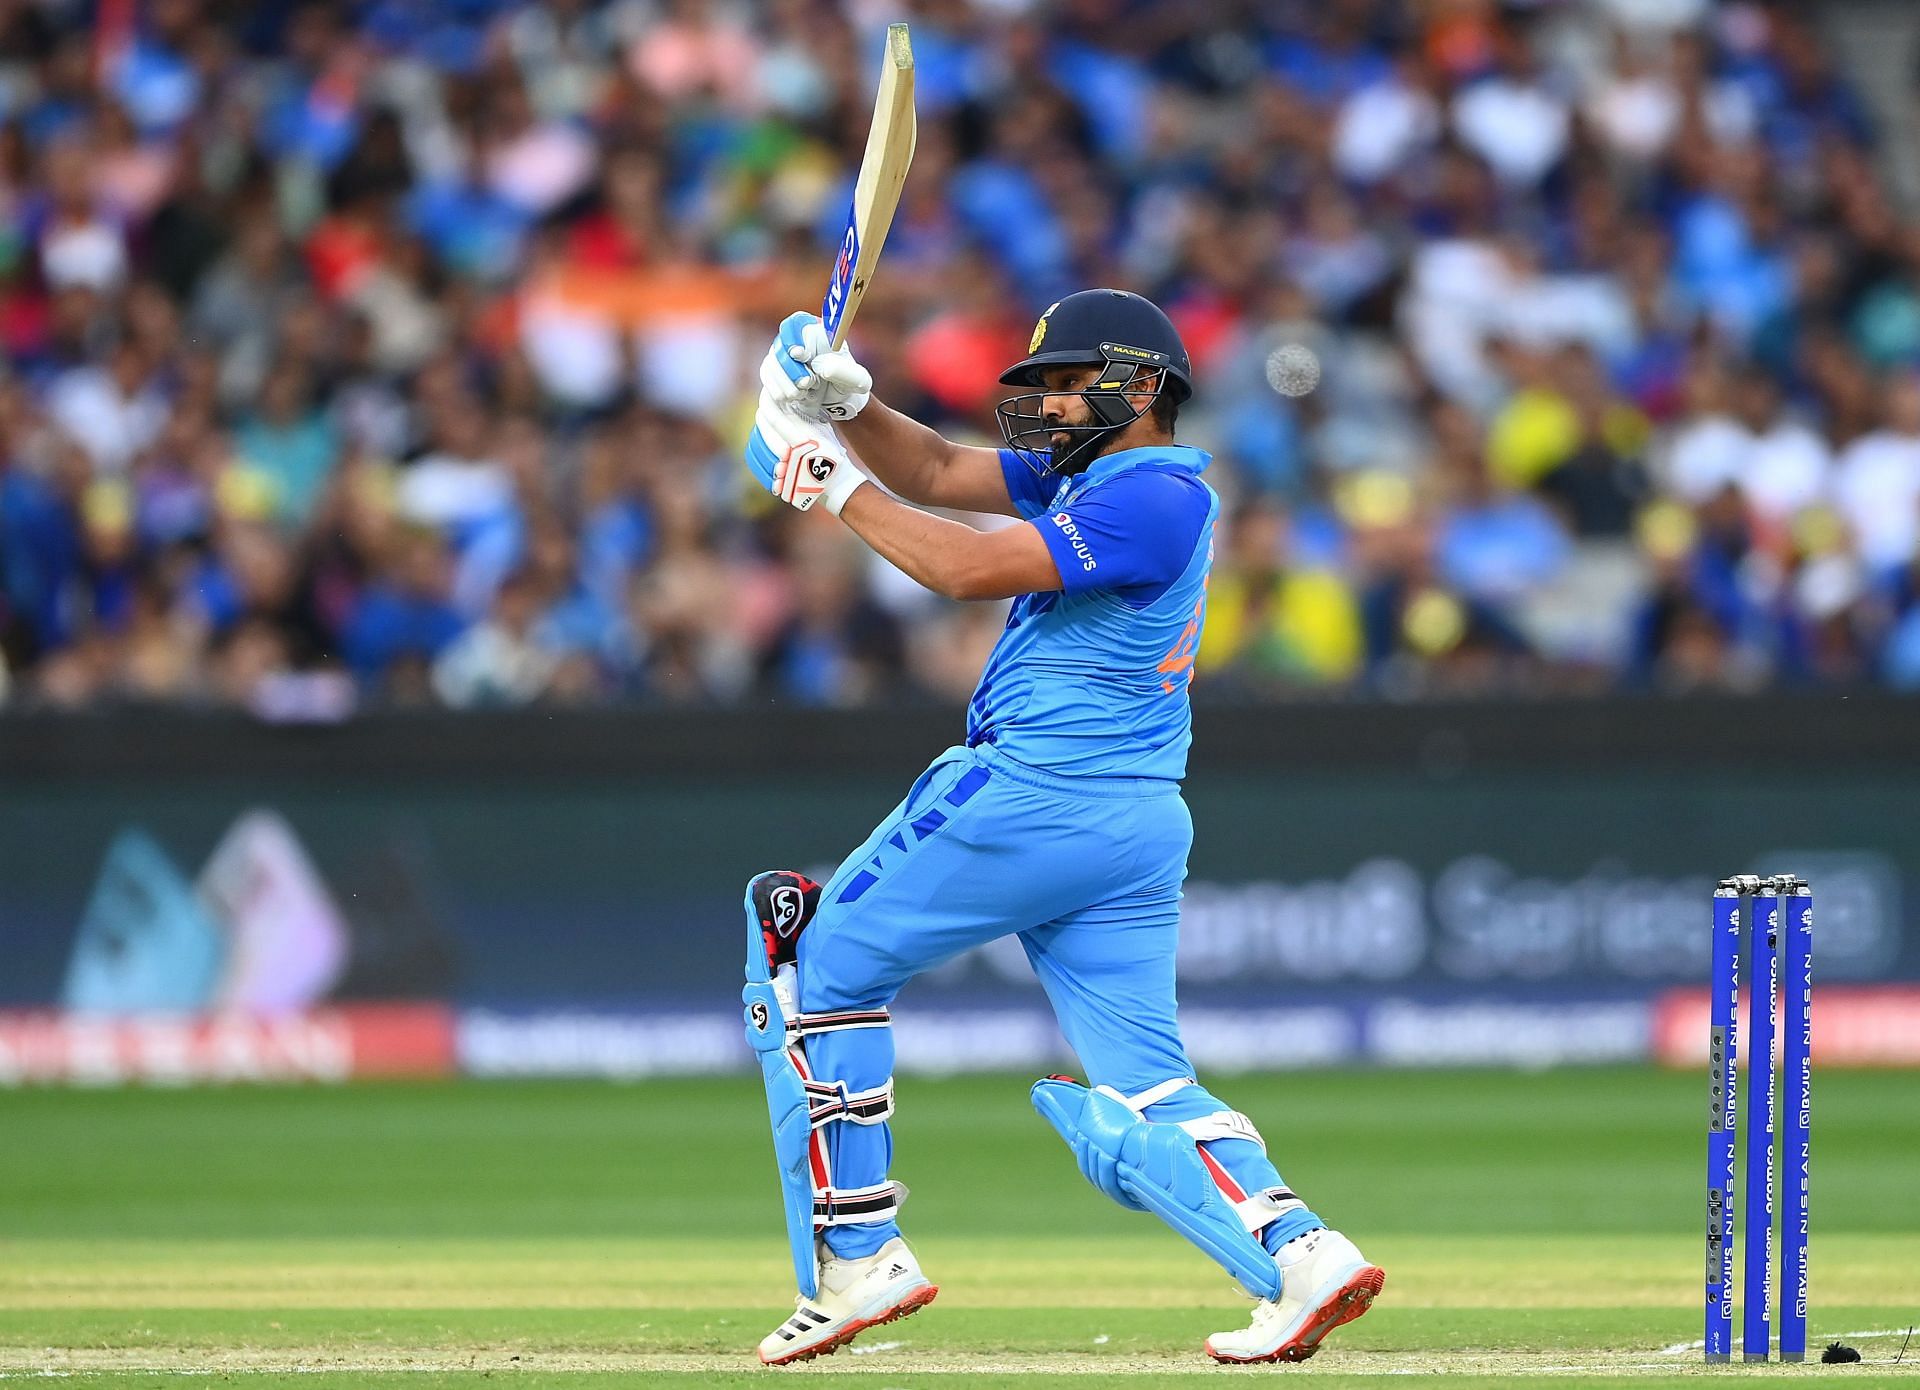 Rohit Sharma was dismissed while trying to play a big shot.